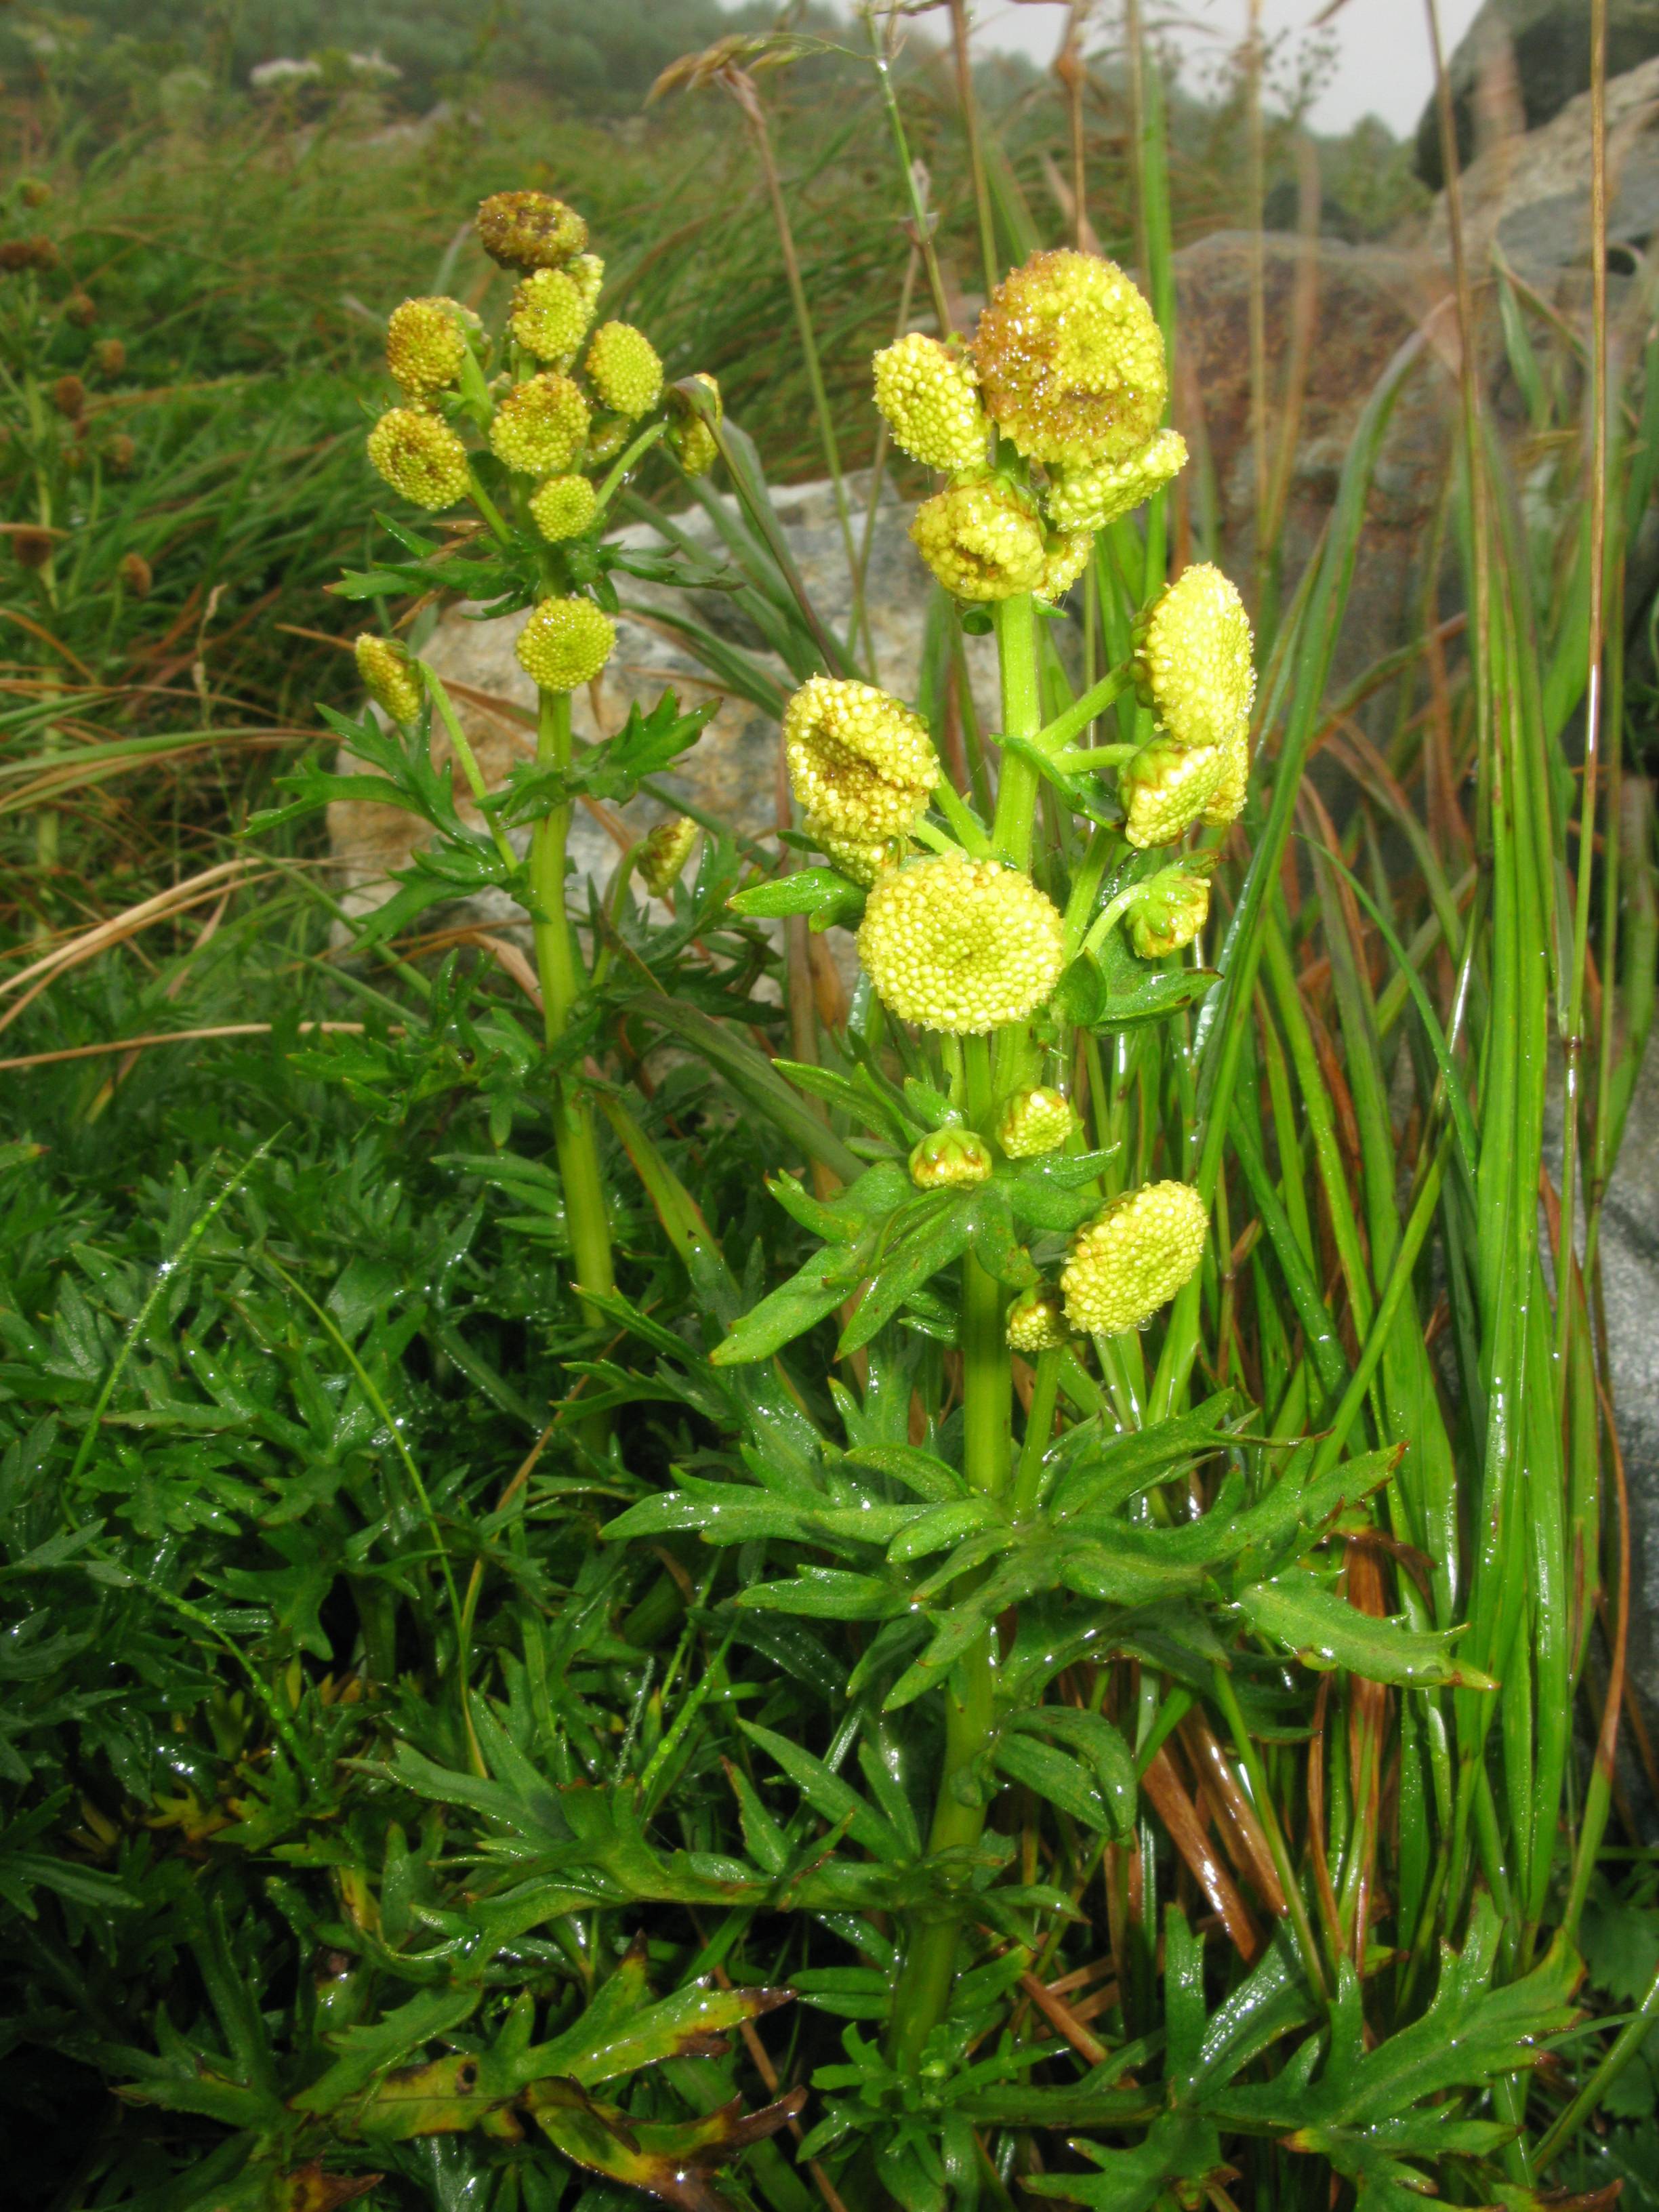 yellow flowers with lush-green leaves and stems